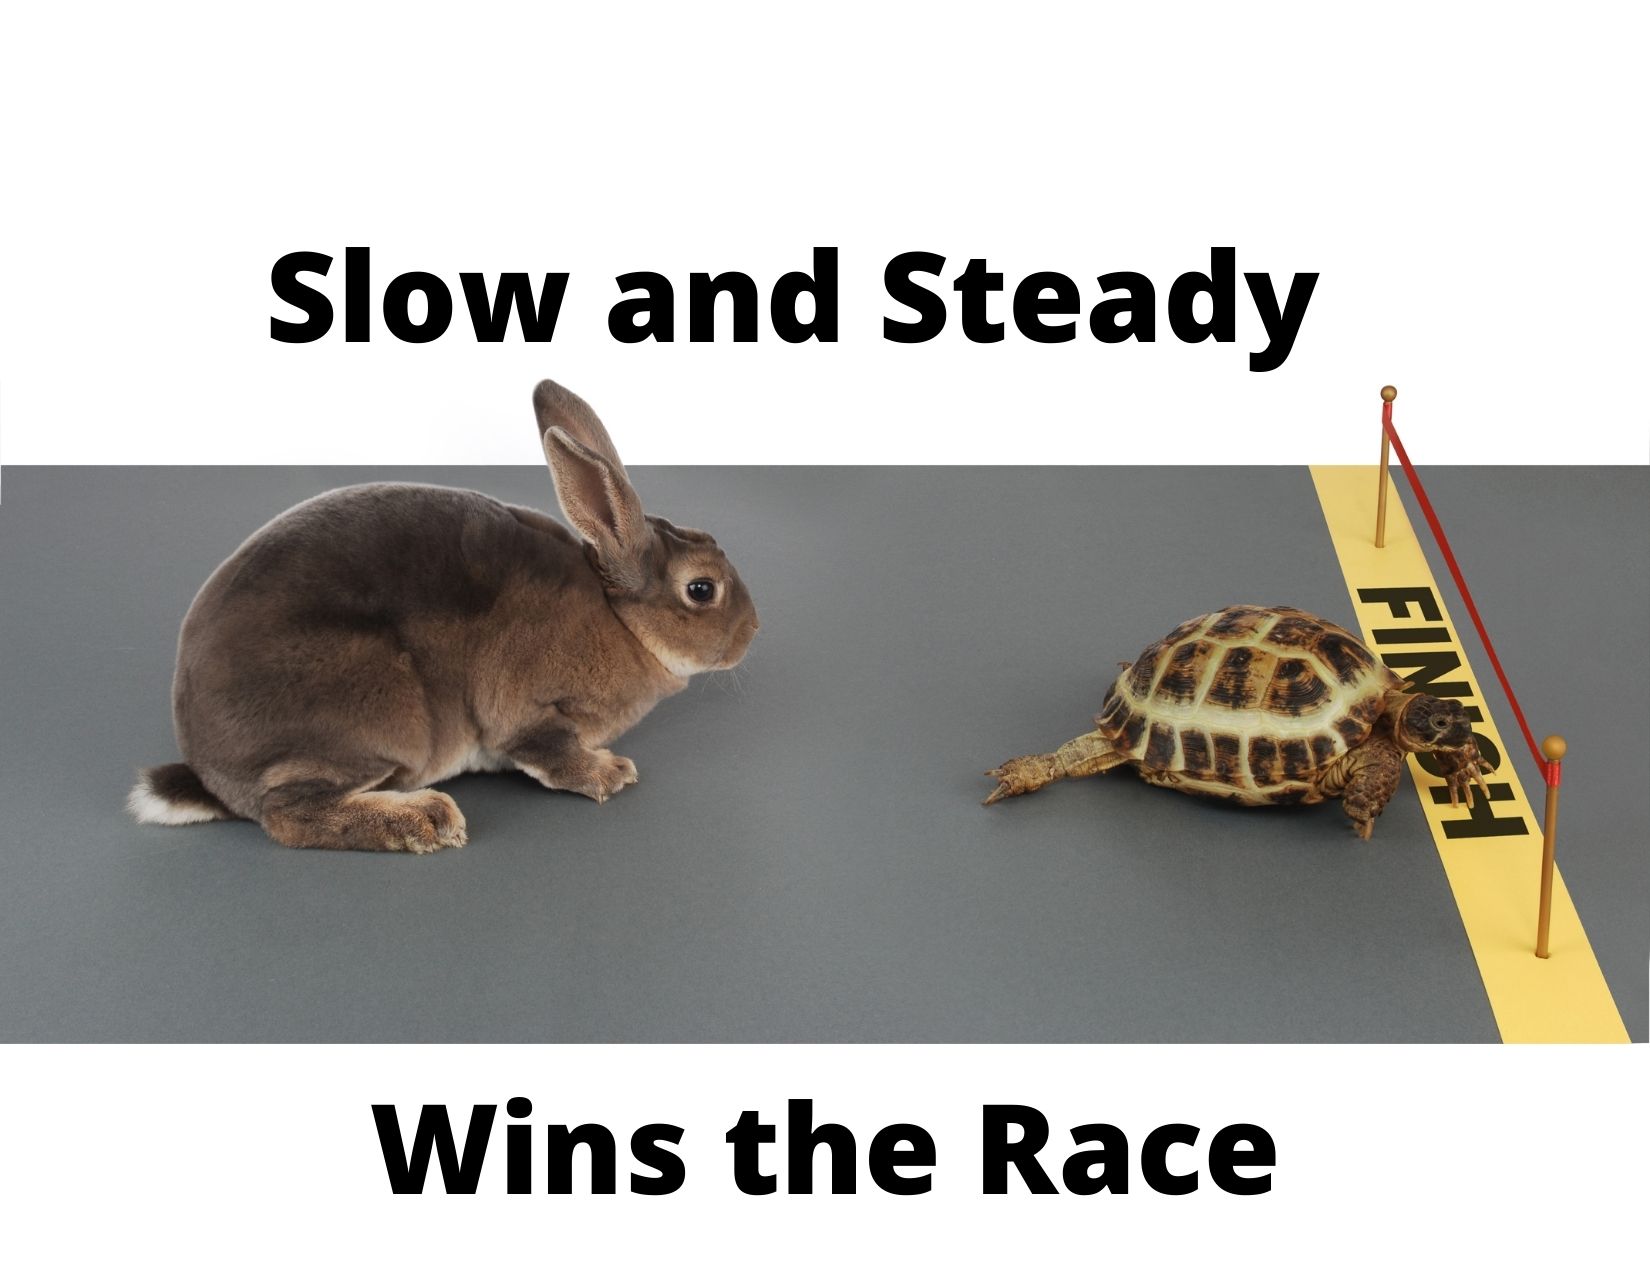 Picture of a hare and a turtle with the caption "slow and steady wins the race"